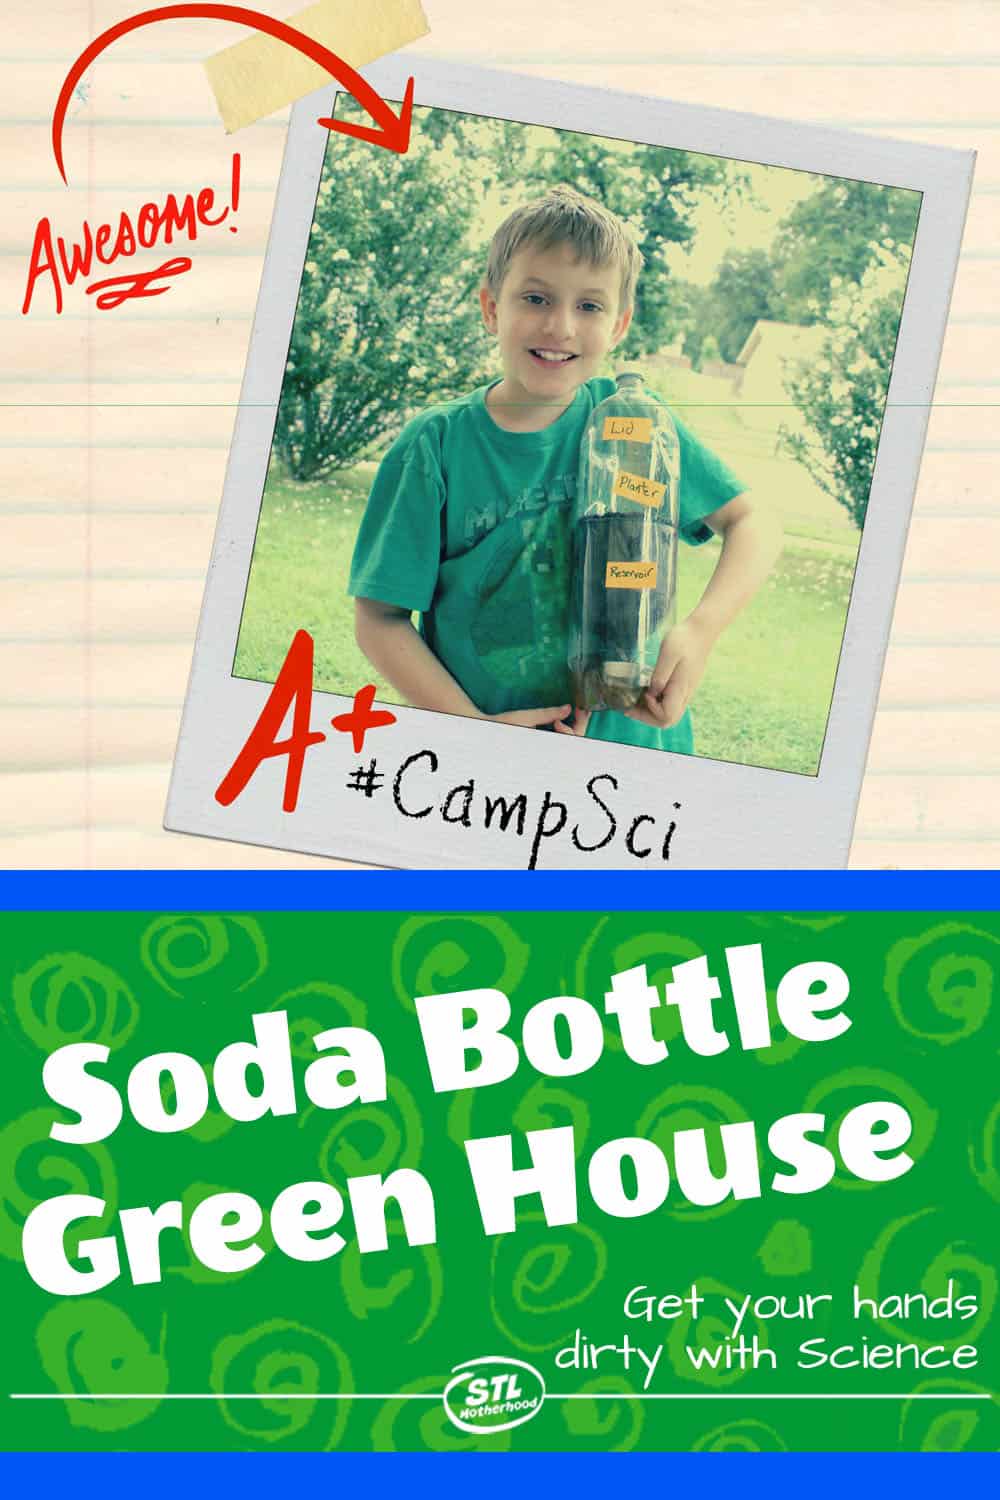 kid with green house made with soda bottles